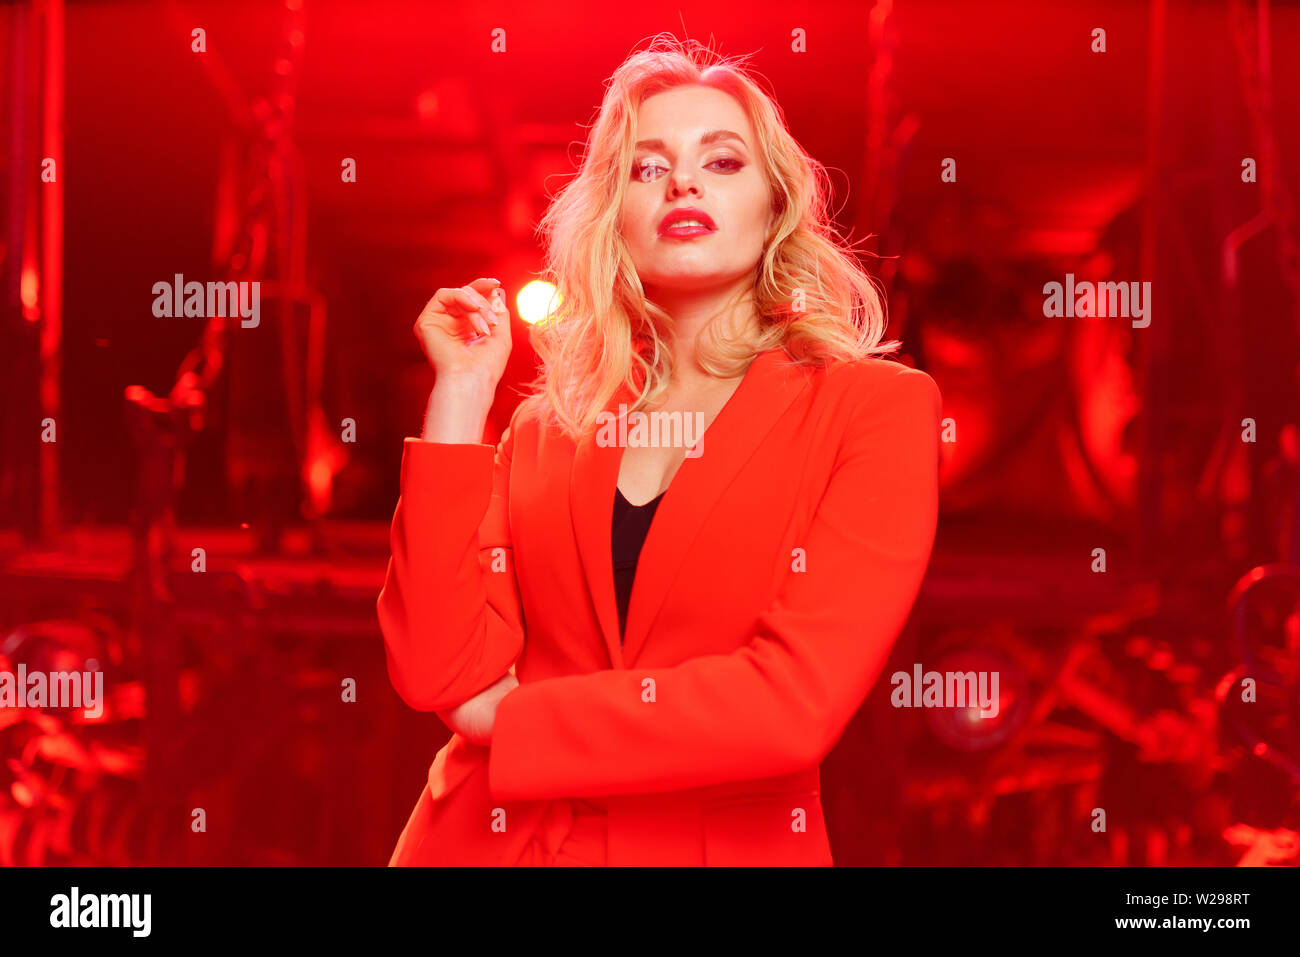 Photo of young blonde woman in red jacket standing on red background Stock Photo